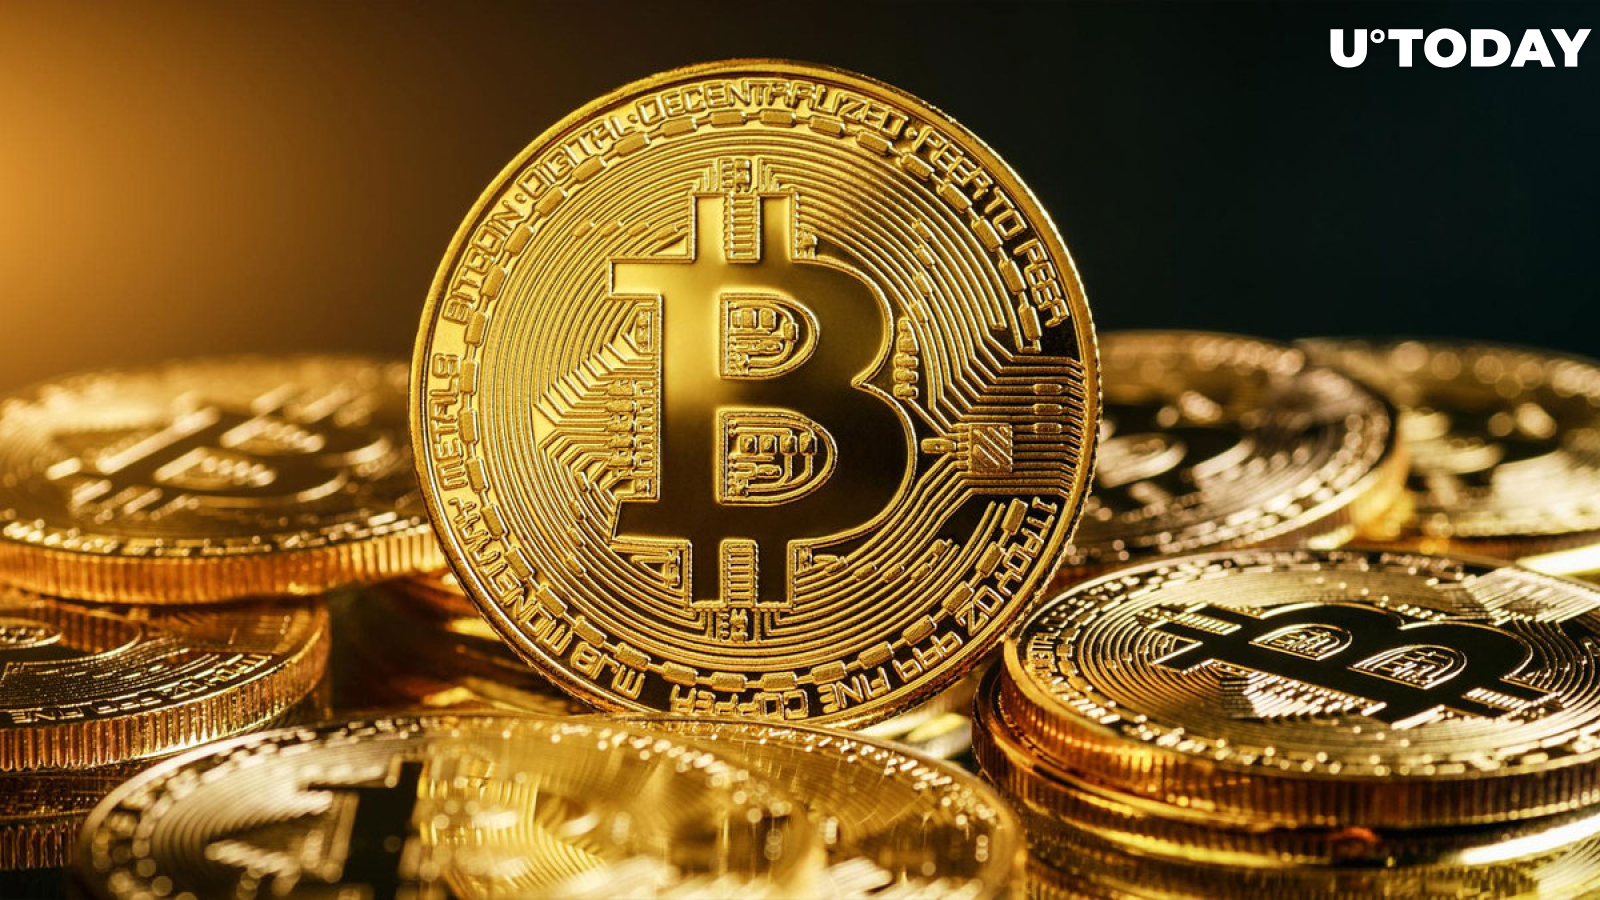 Bitcoin (BTC) Primed for Major Run if This 'Beautiful' Pattern Validates